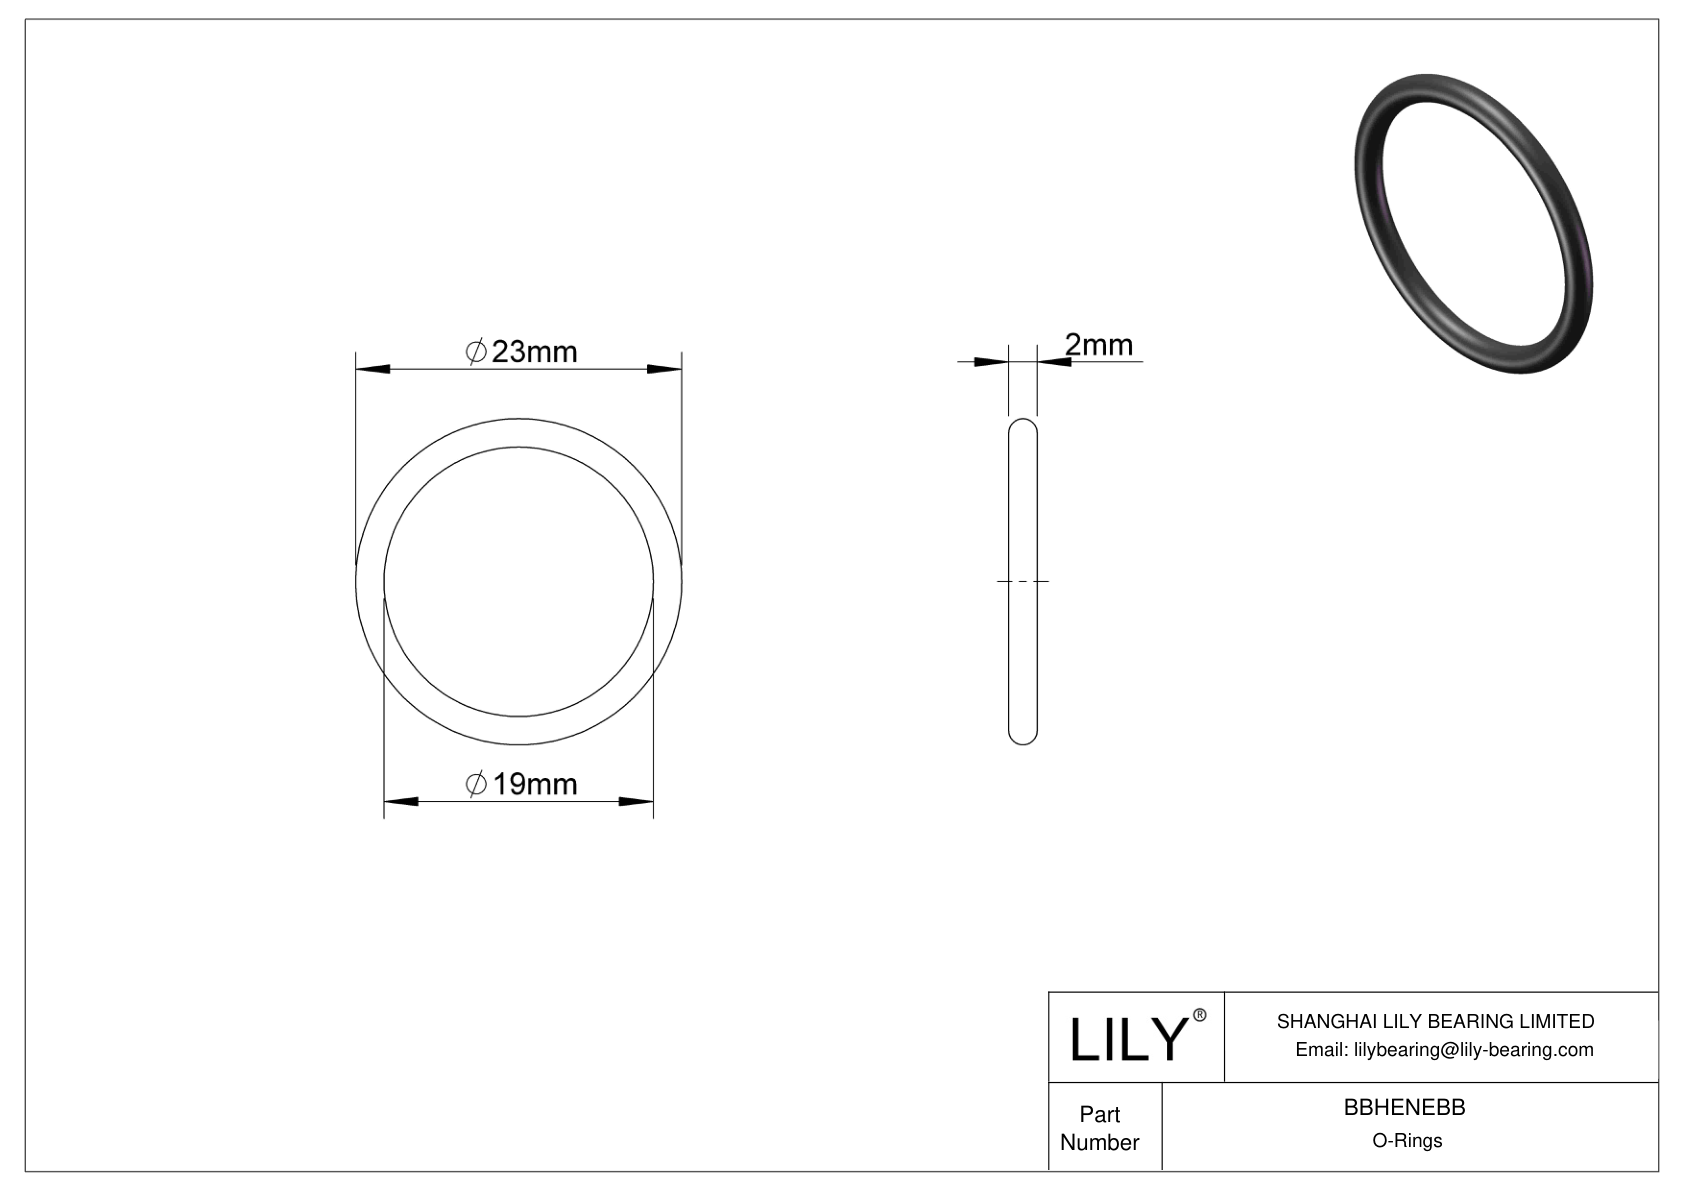 BBHENEBB Oil Resistant O-Rings Round cad drawing